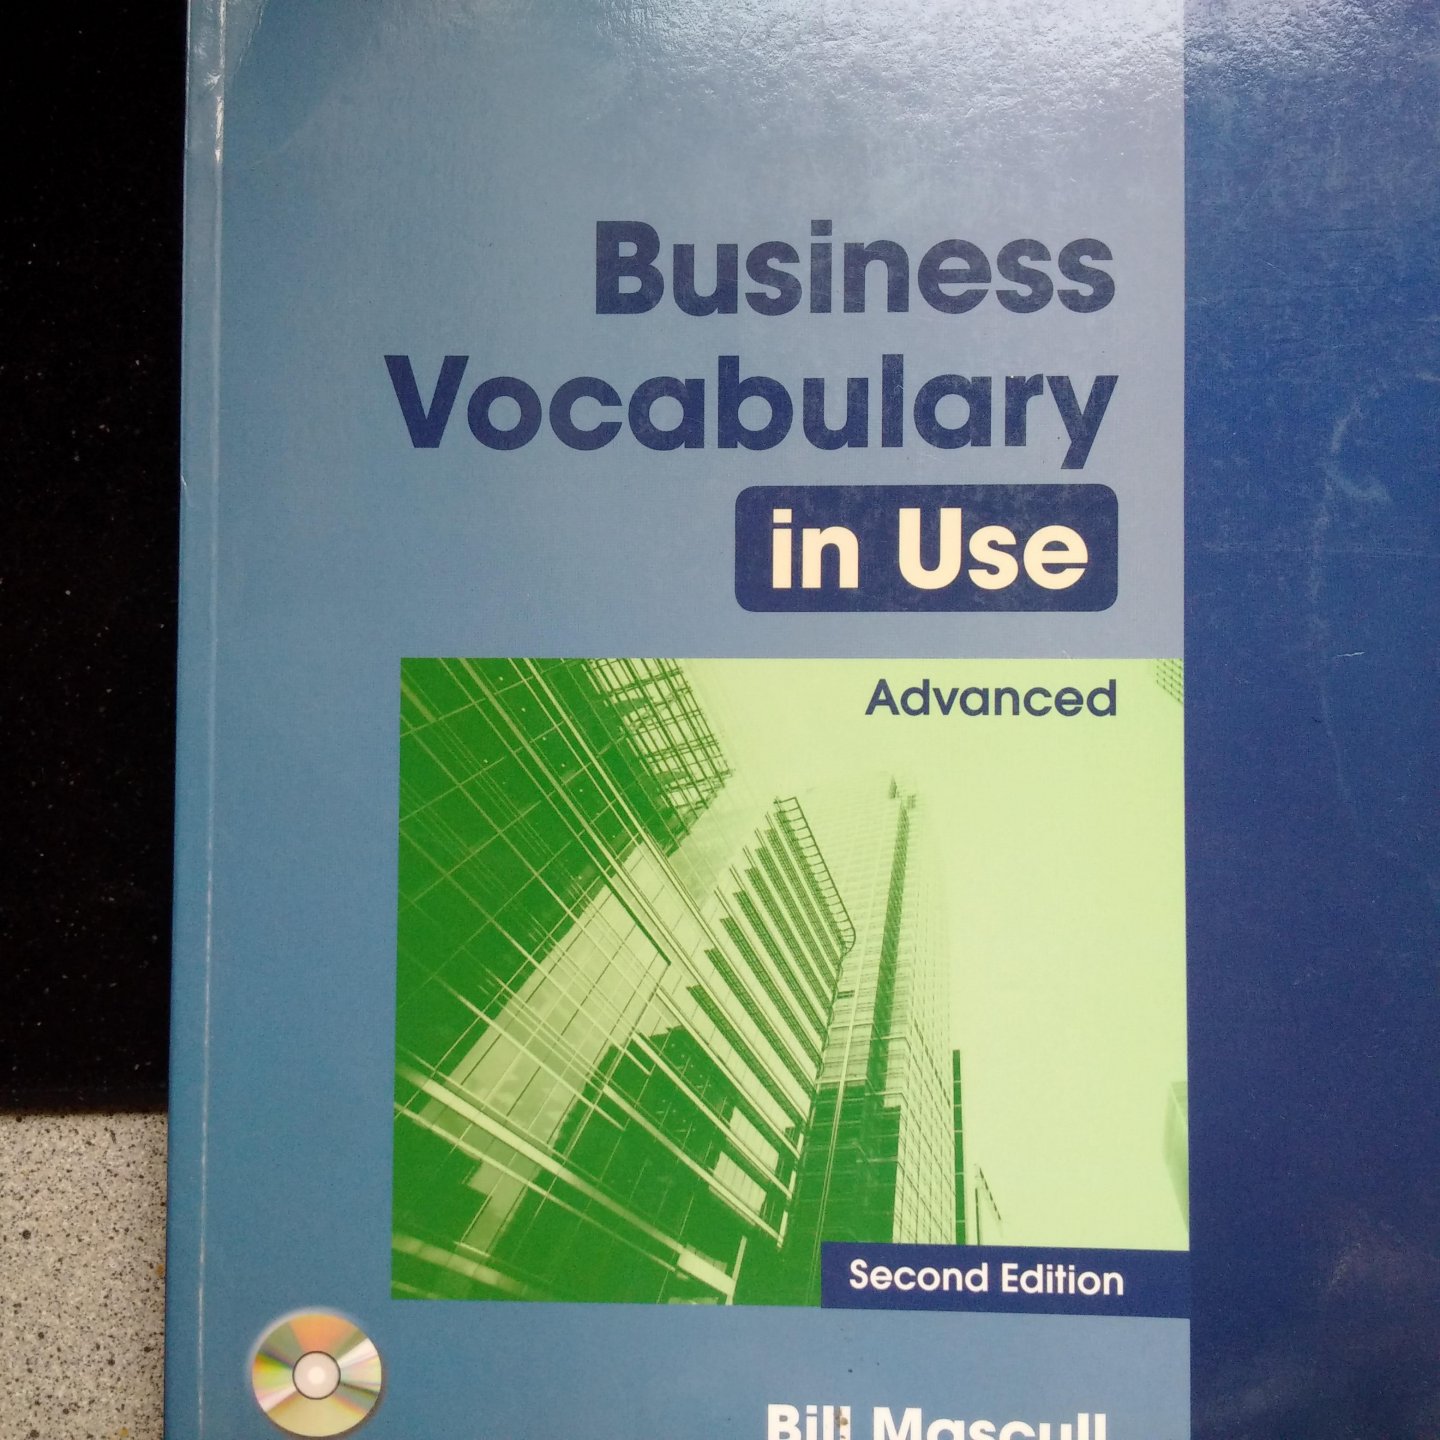 Mascull, Bill - Business Vocabulary in Use